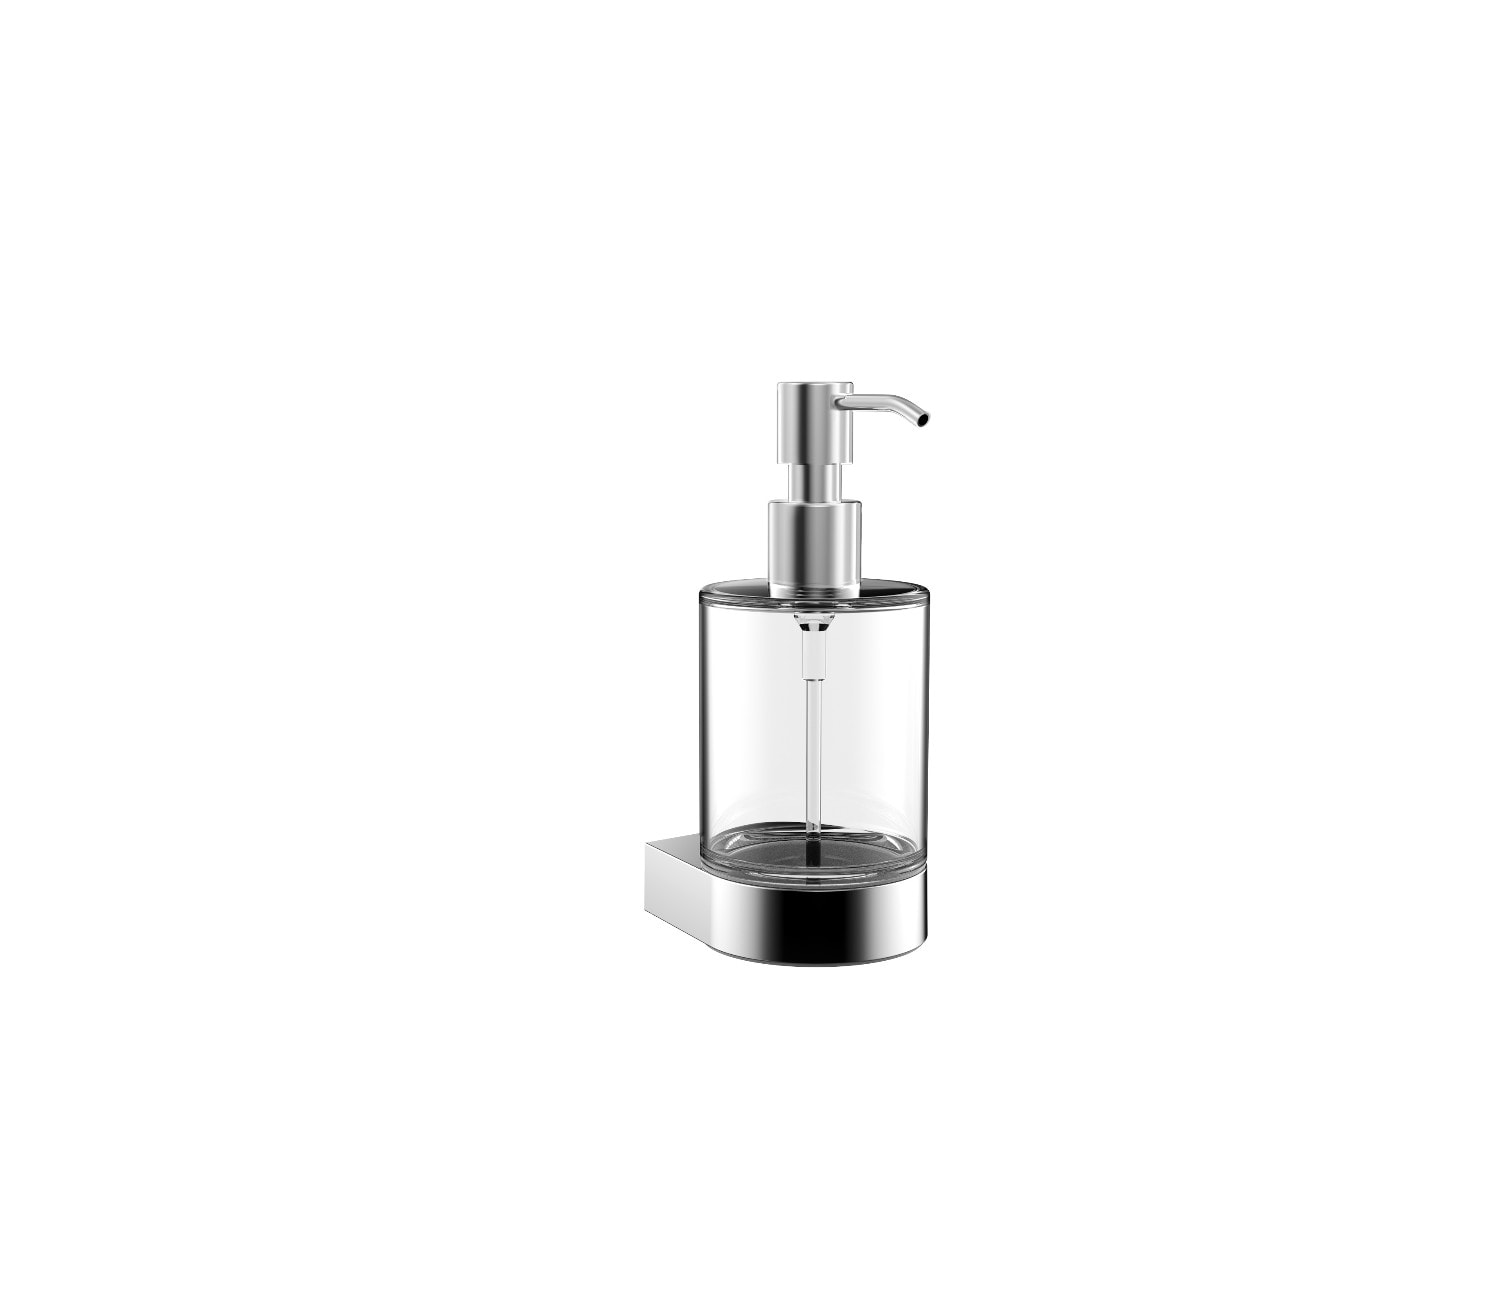 Kor Soap Dispenser - Wall Mounted with Towel Bar